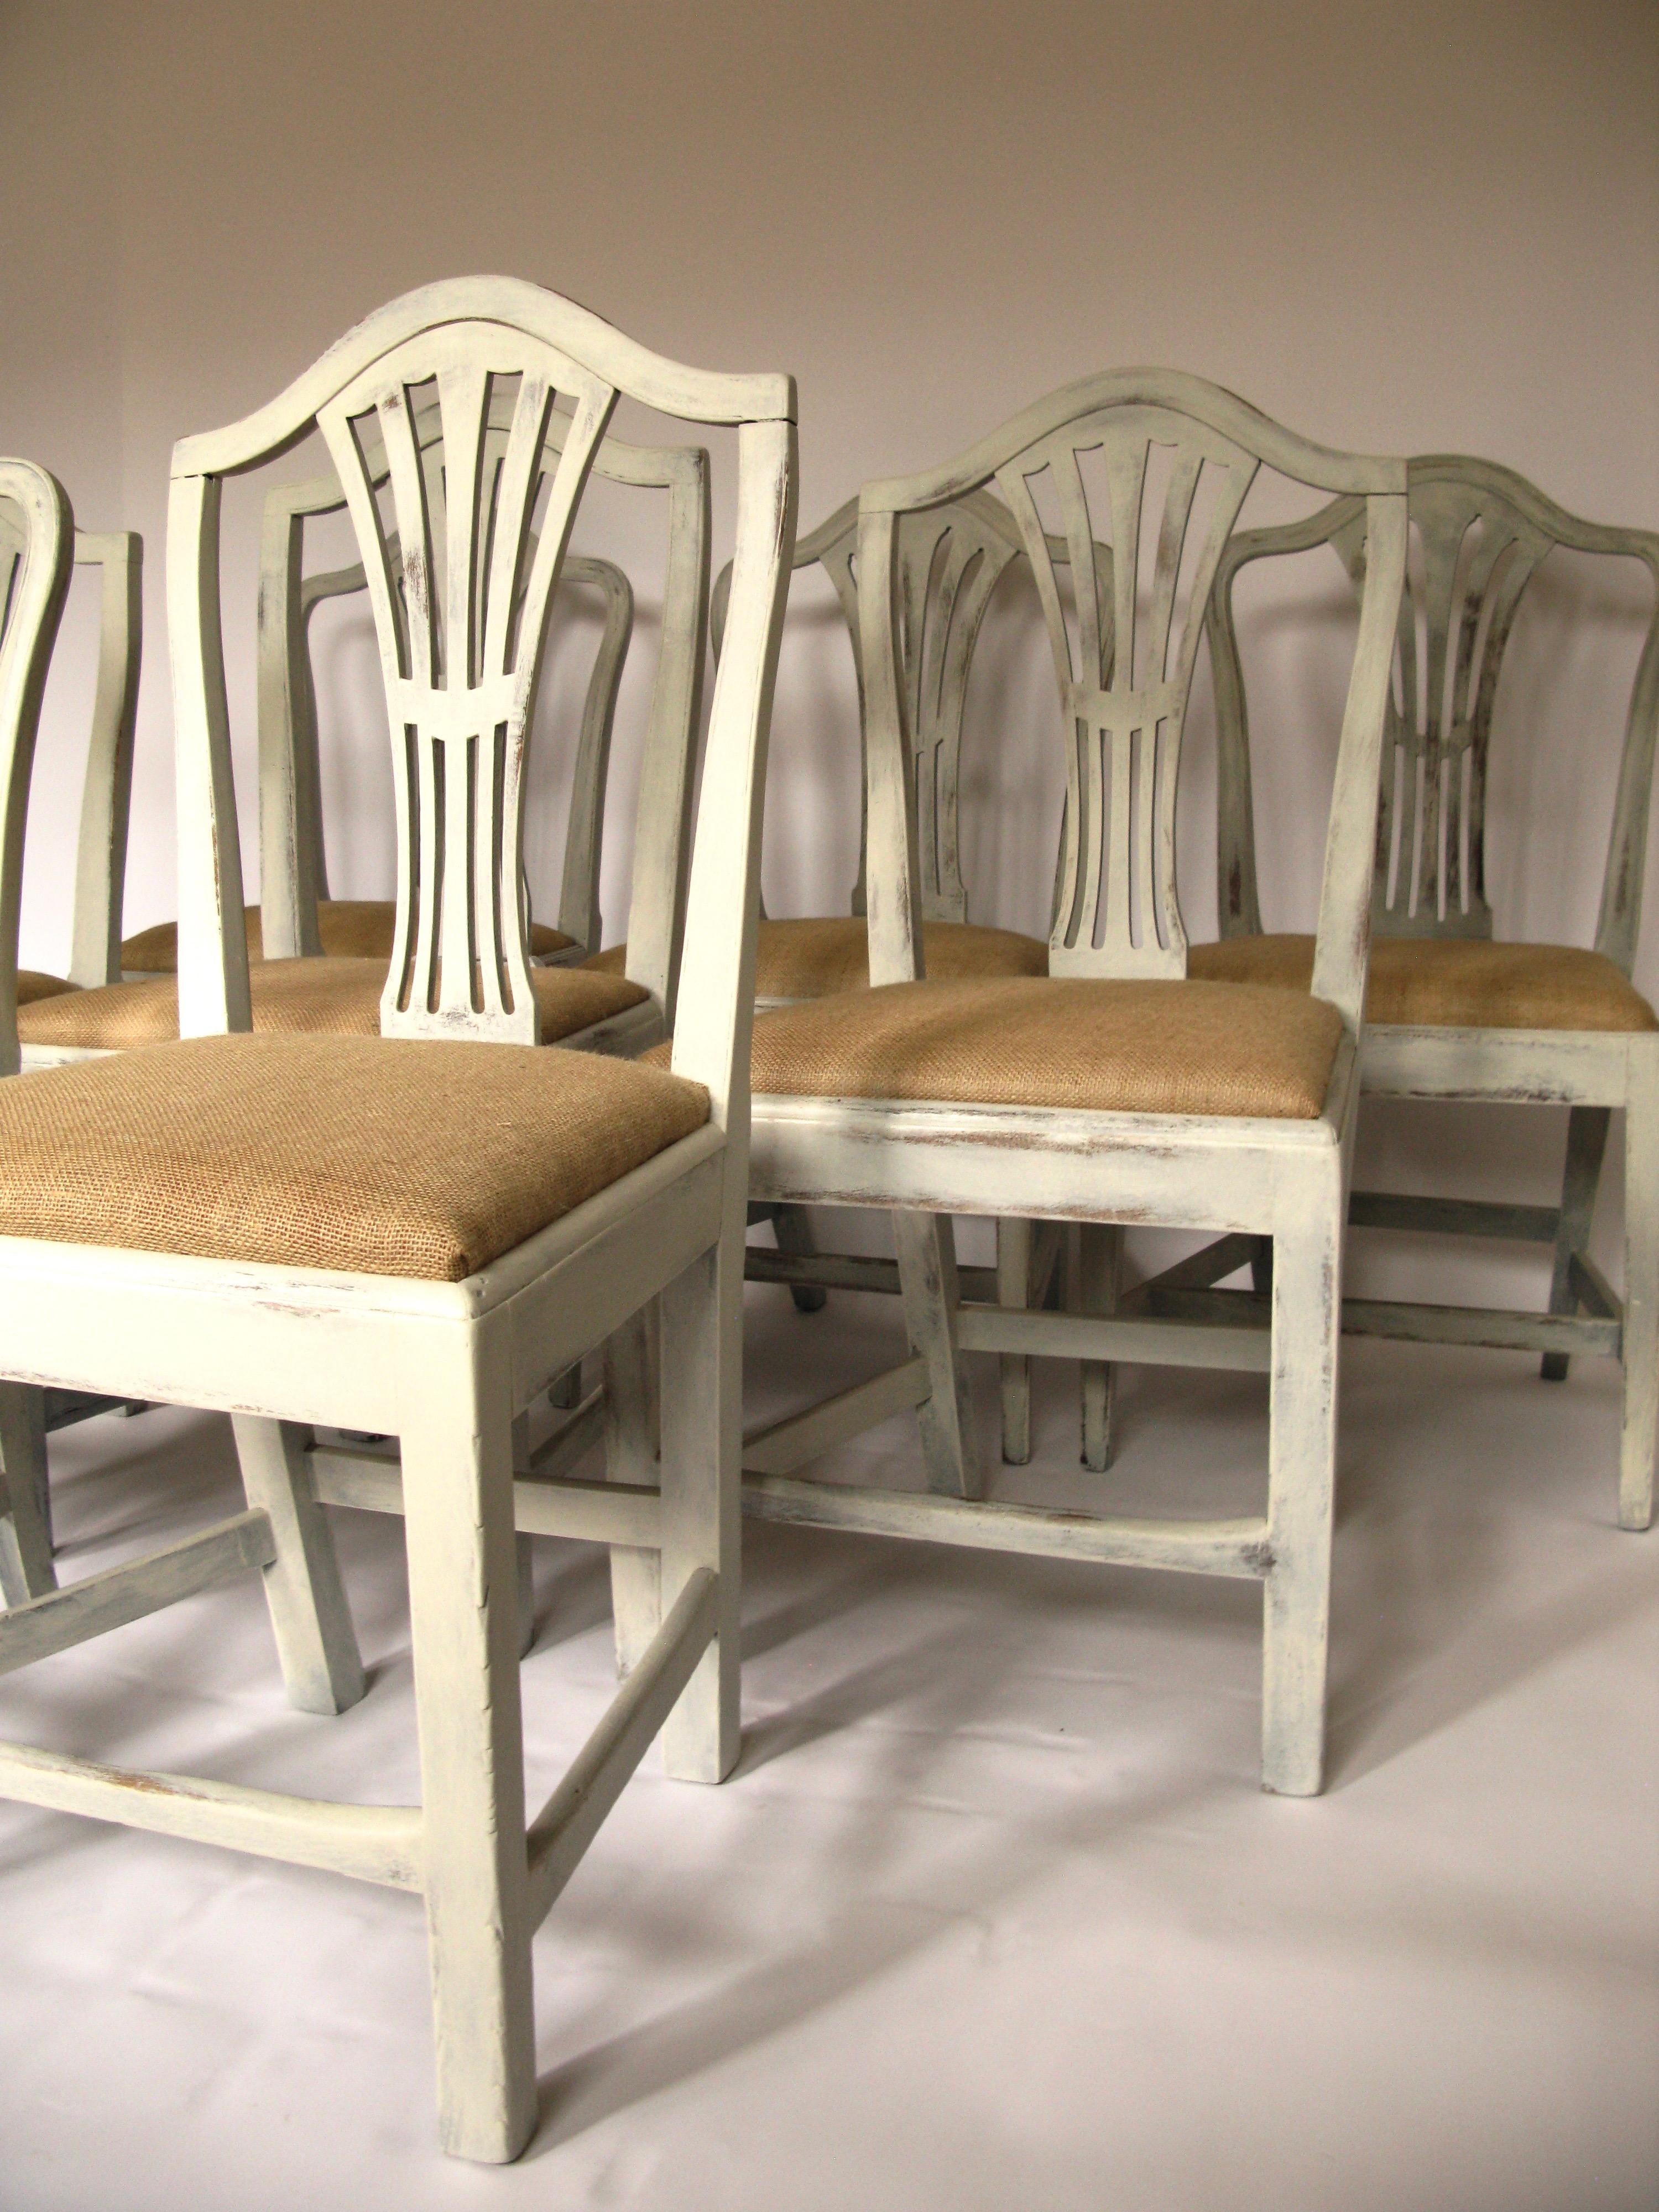 Hepplewhite Harlequin Set of 8 Antique Chairs, Early 19th Century, England, Decorative